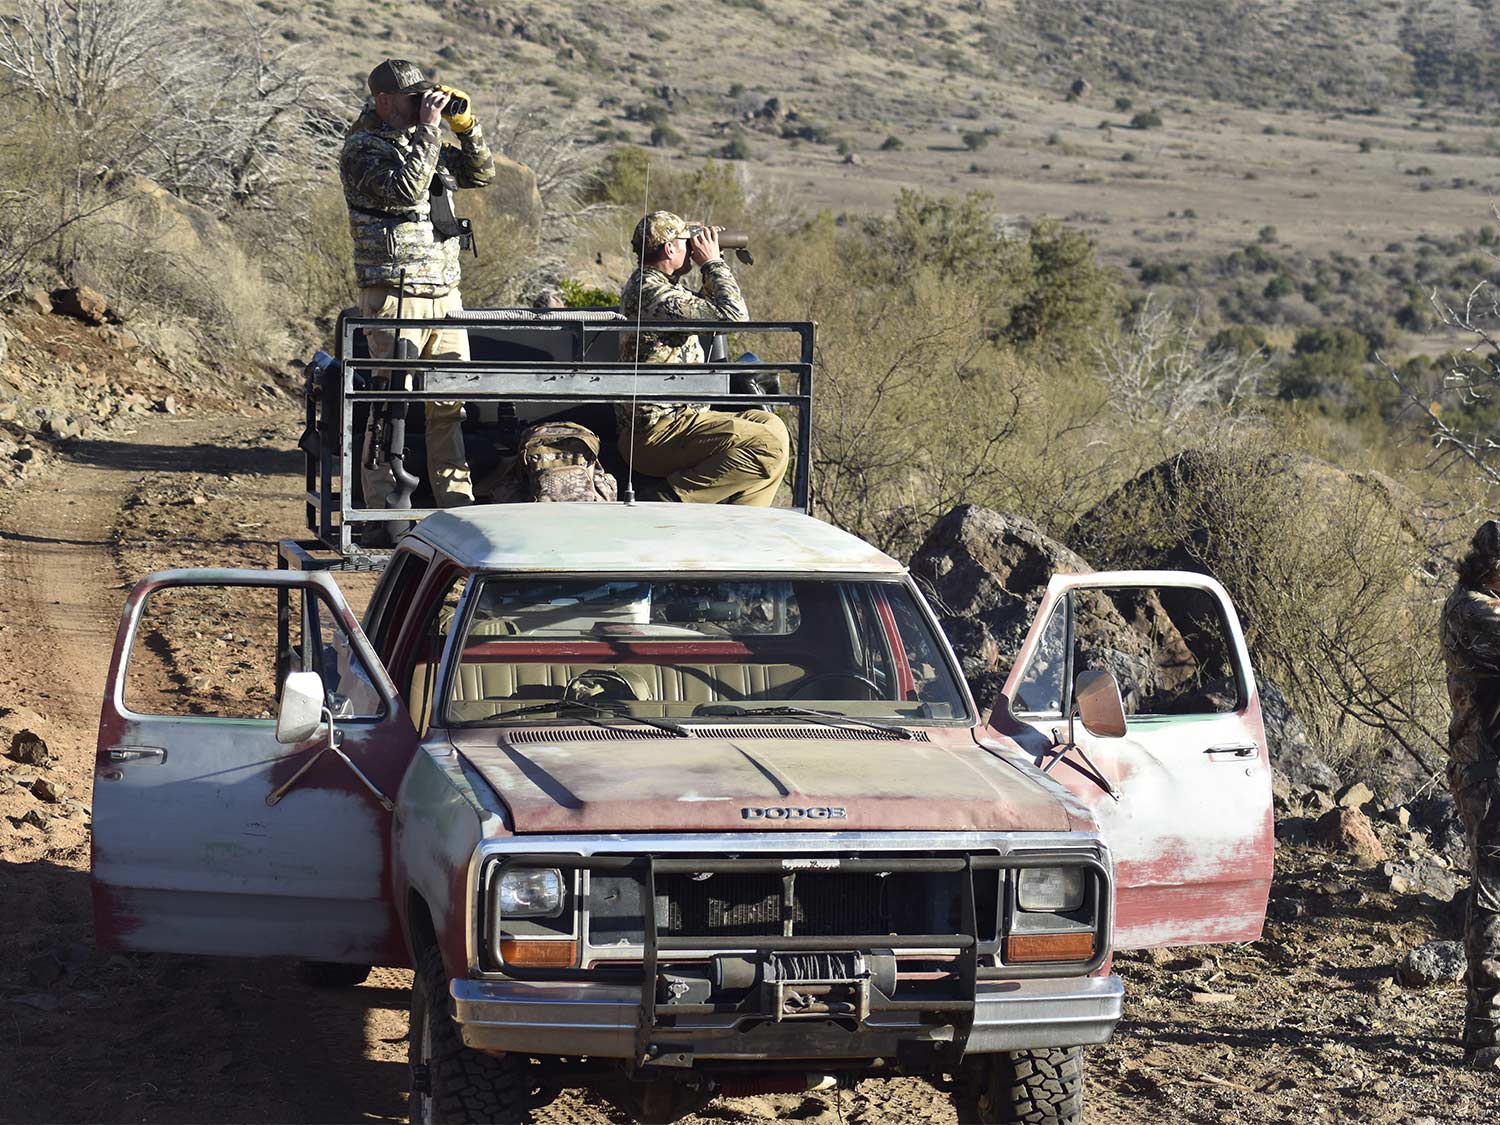 A group of hunters scout from the bed of a truck using binoculars.